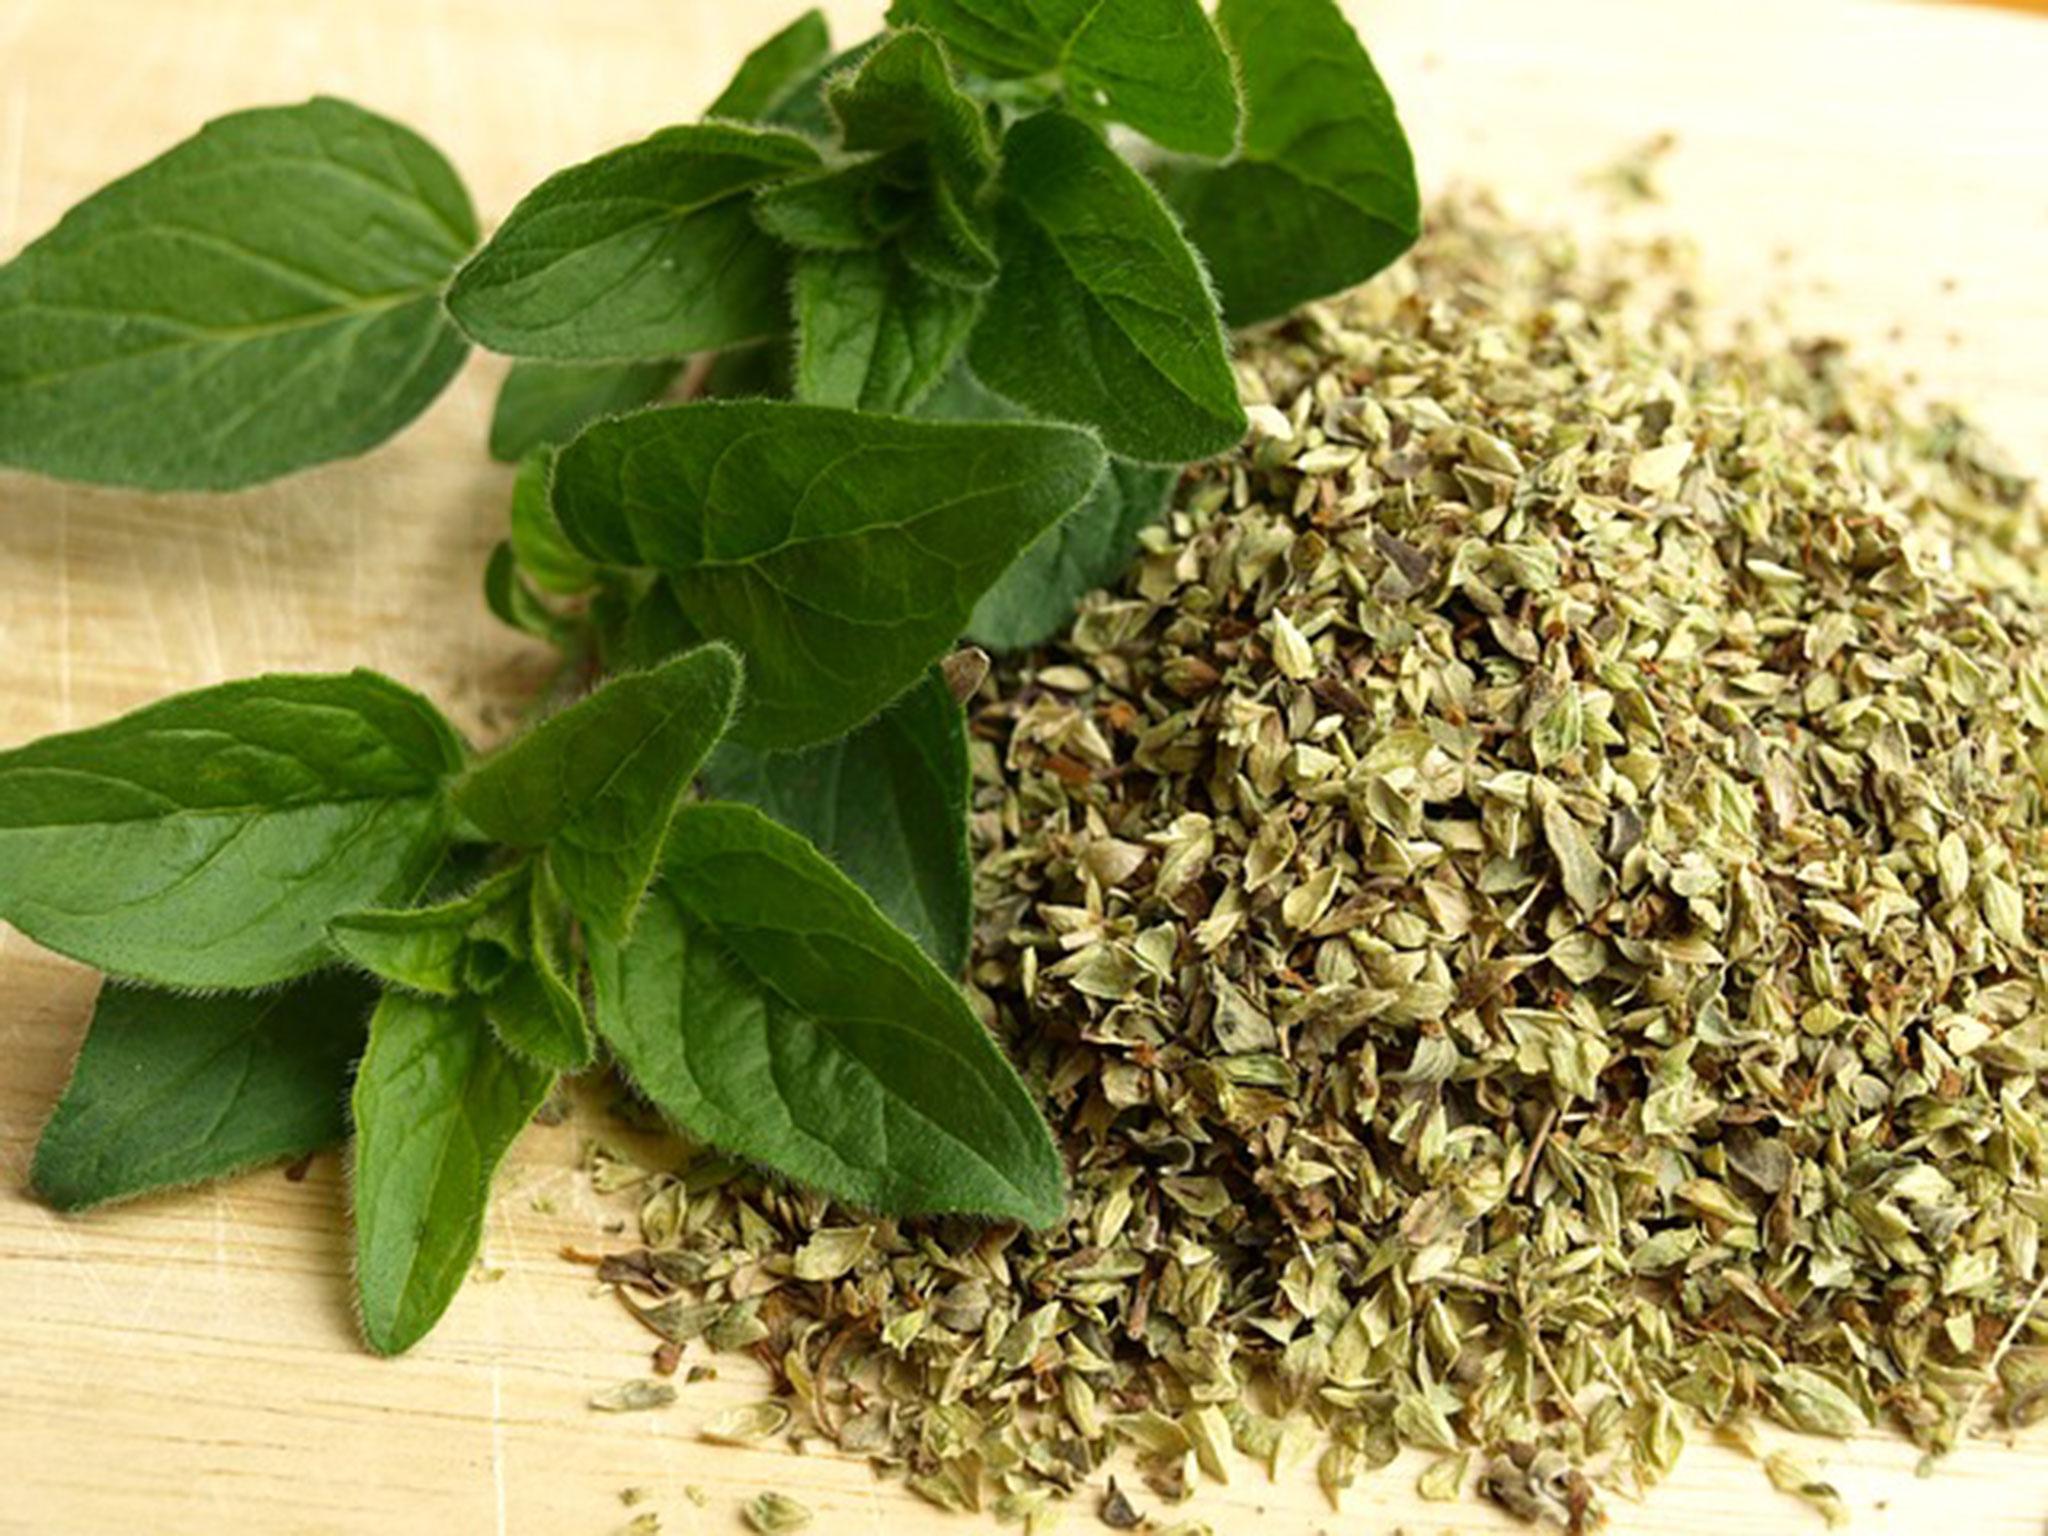 There are plenty of growing options for oregano